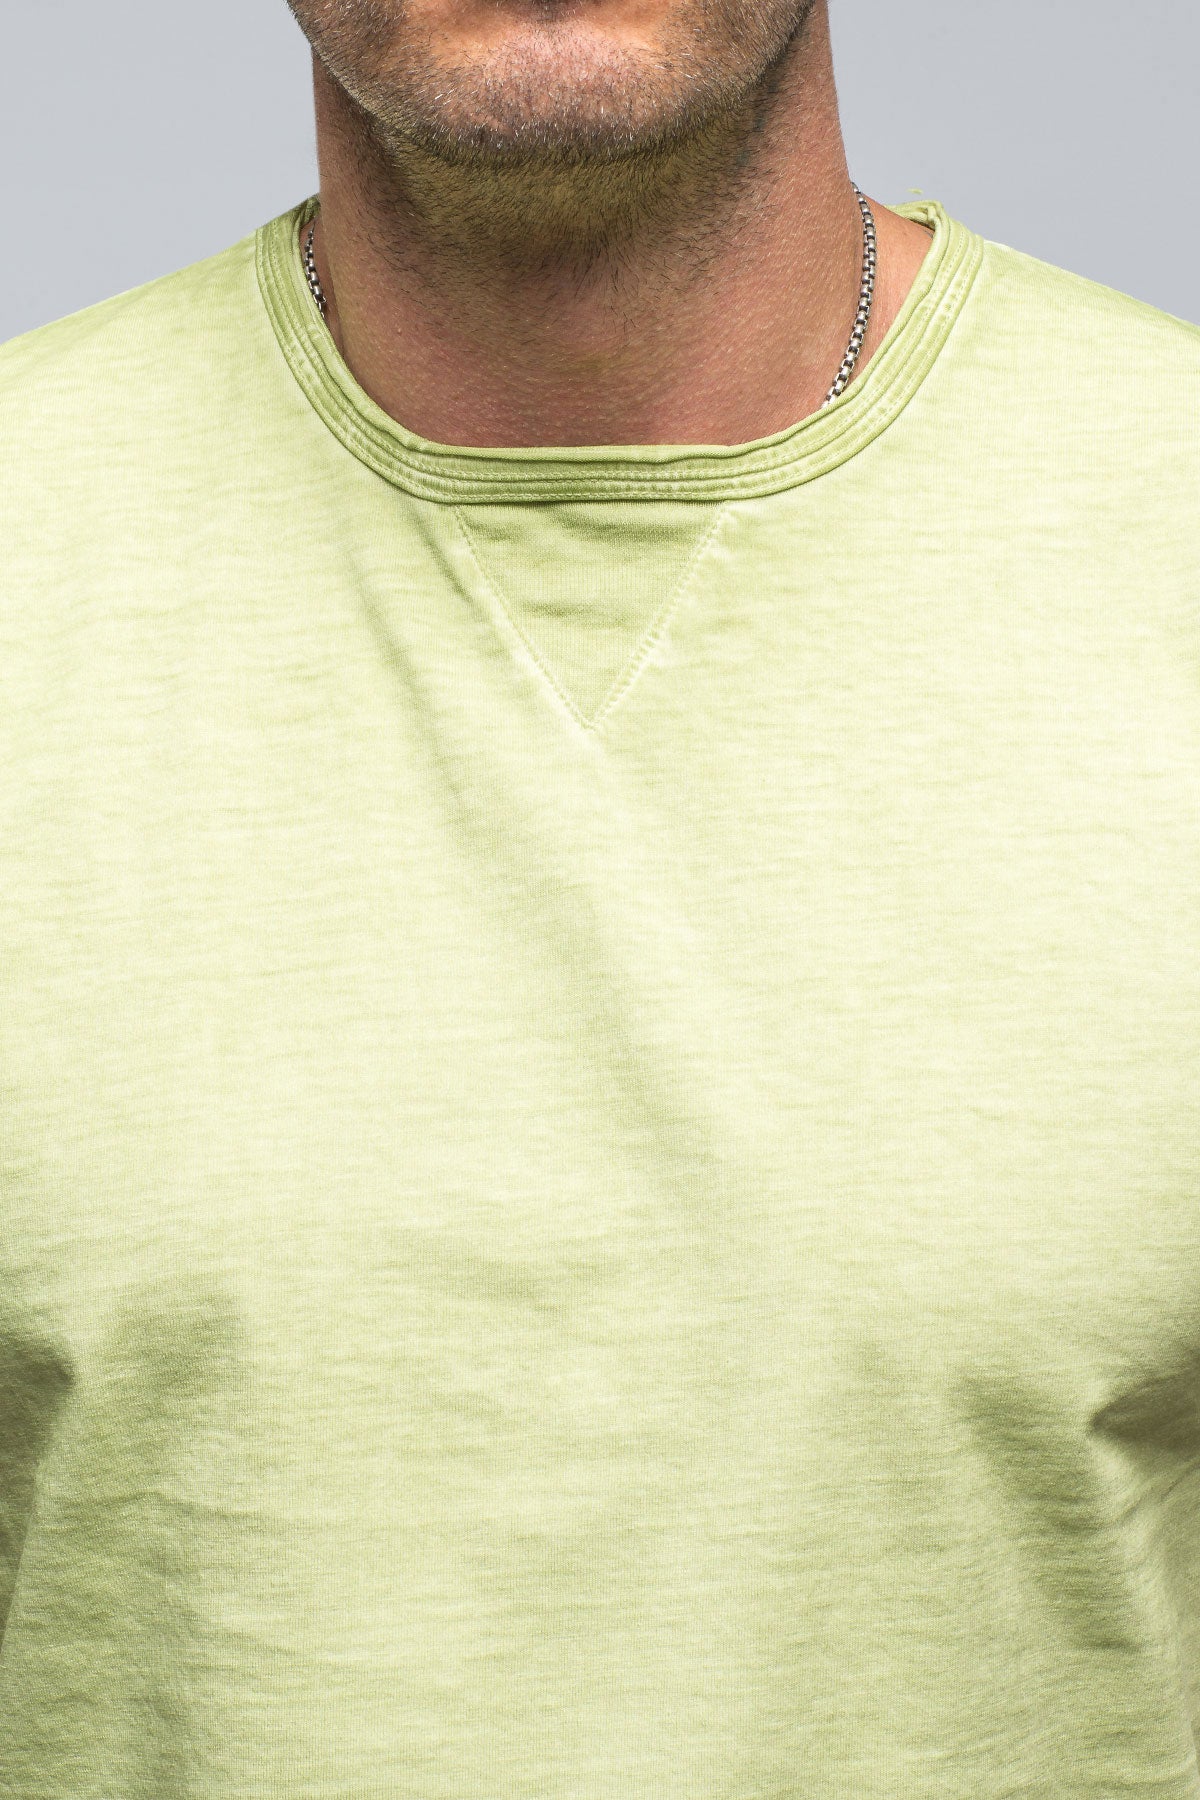 York Crew Neck in Lime | Mens - Shirts - T-Shirts | Gimo's Cotton